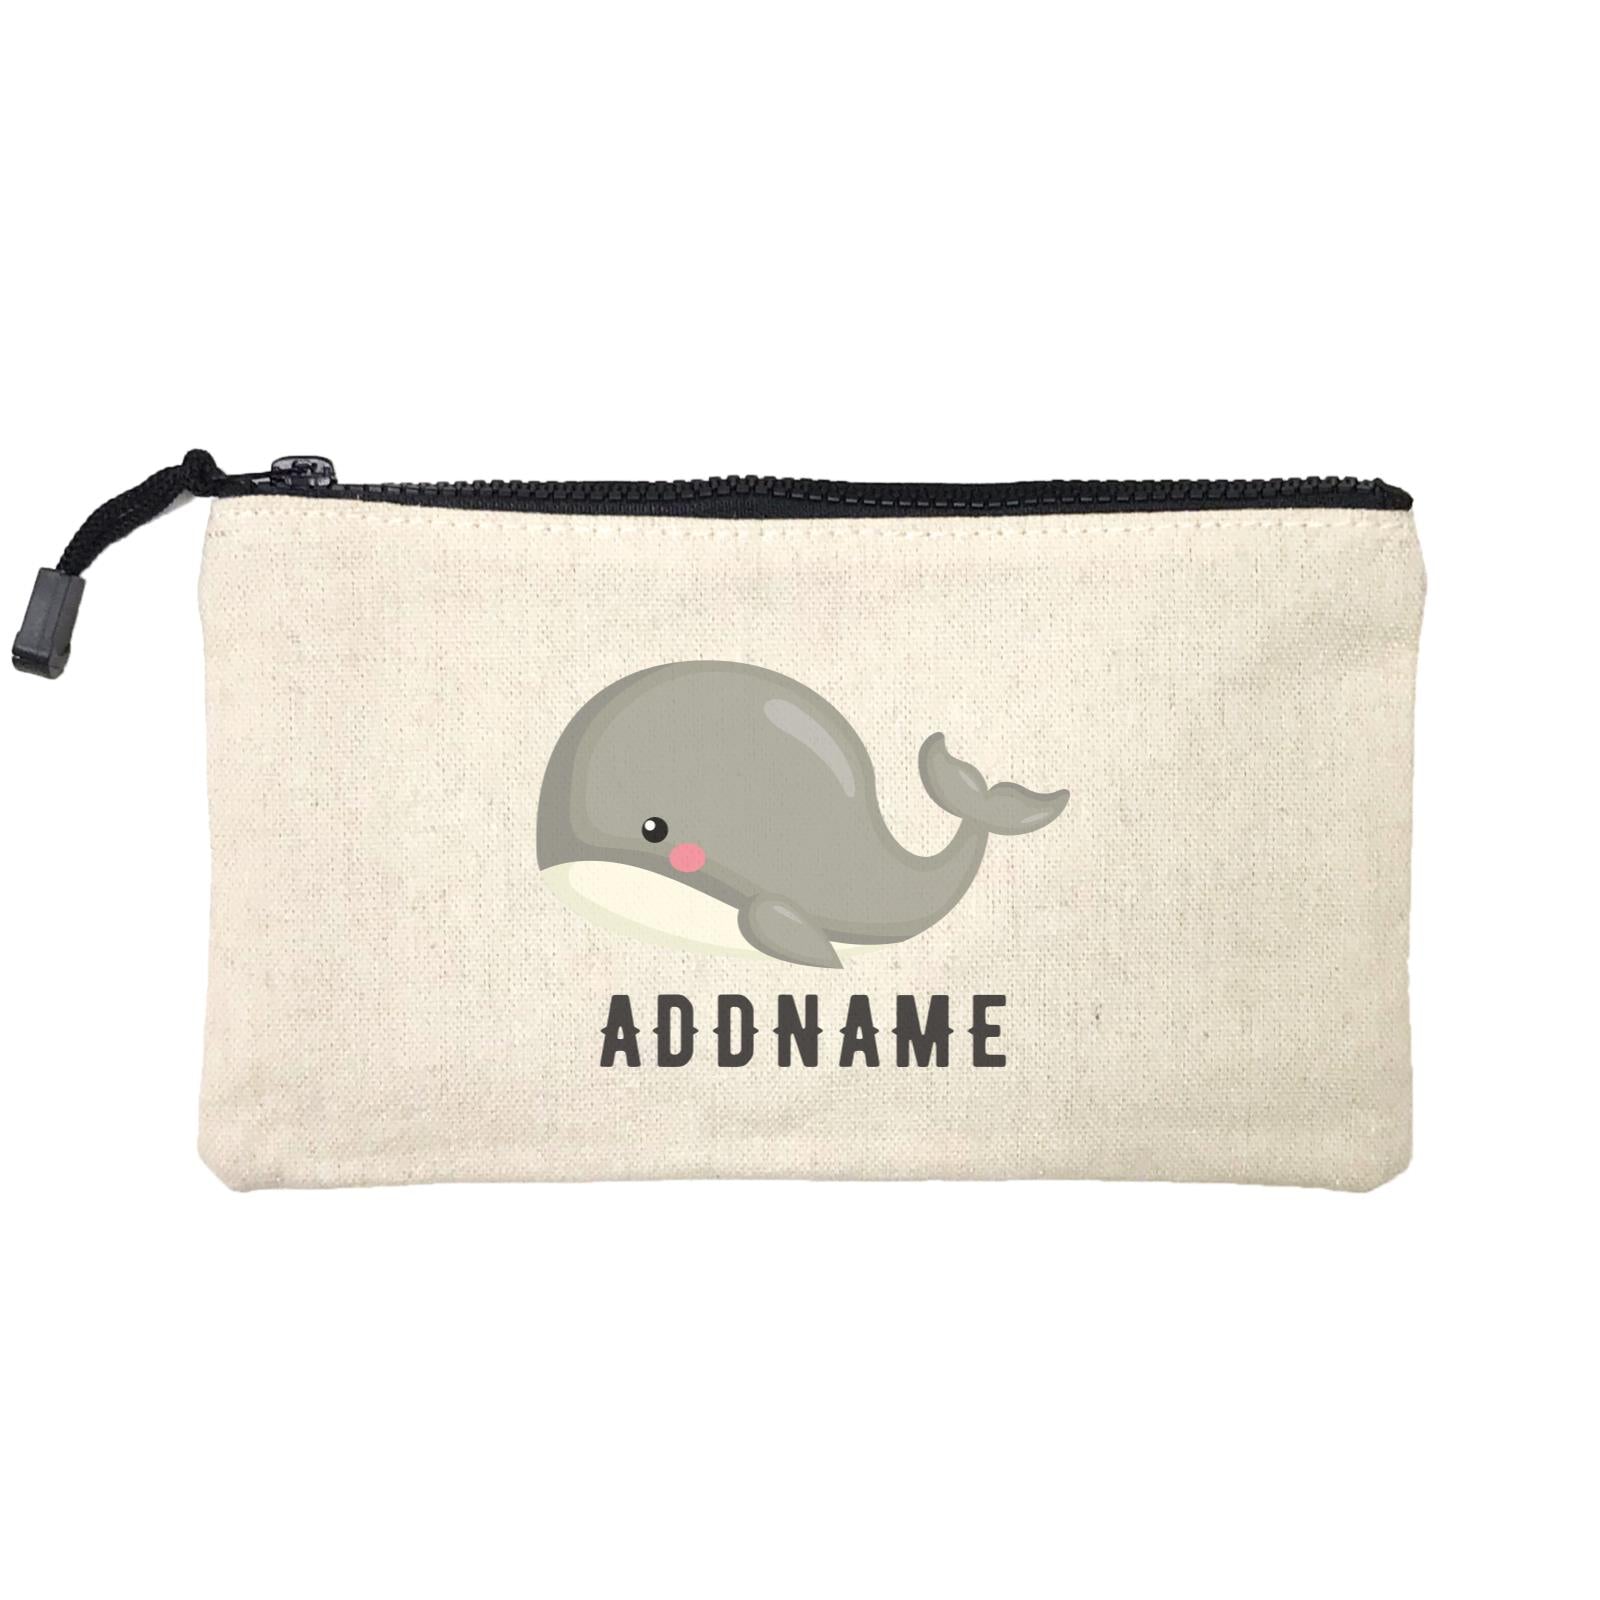 Birthday Sailor Baby Whale Addname Mini Accessories Stationery Pouch